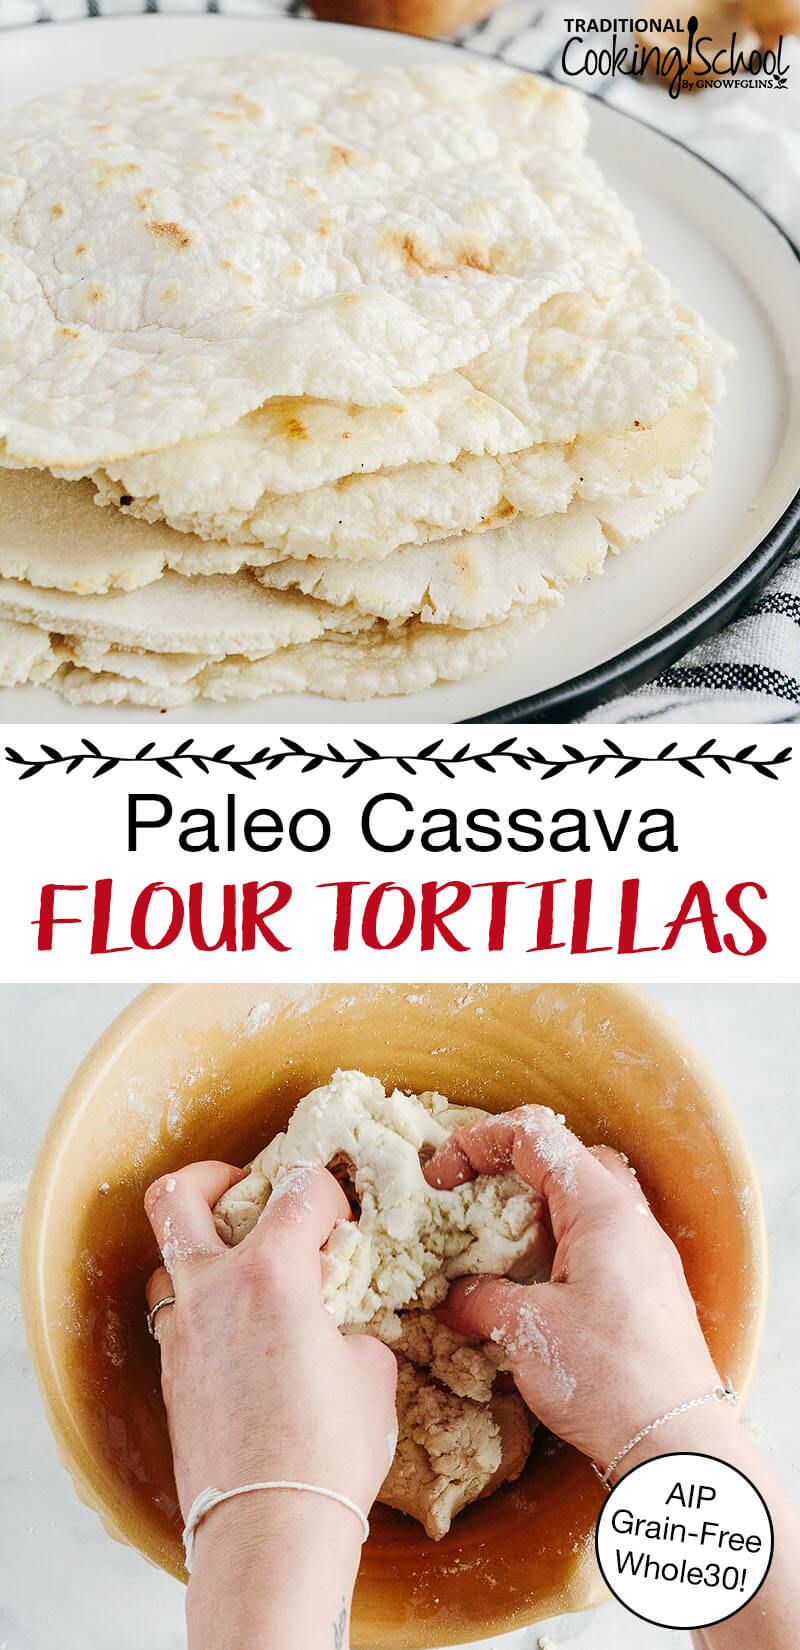 photo collage of making homemade tortillas with text overlay: "Paleo Cassava Flour Tortillas (AIP, Grain-Free, Whole30)"